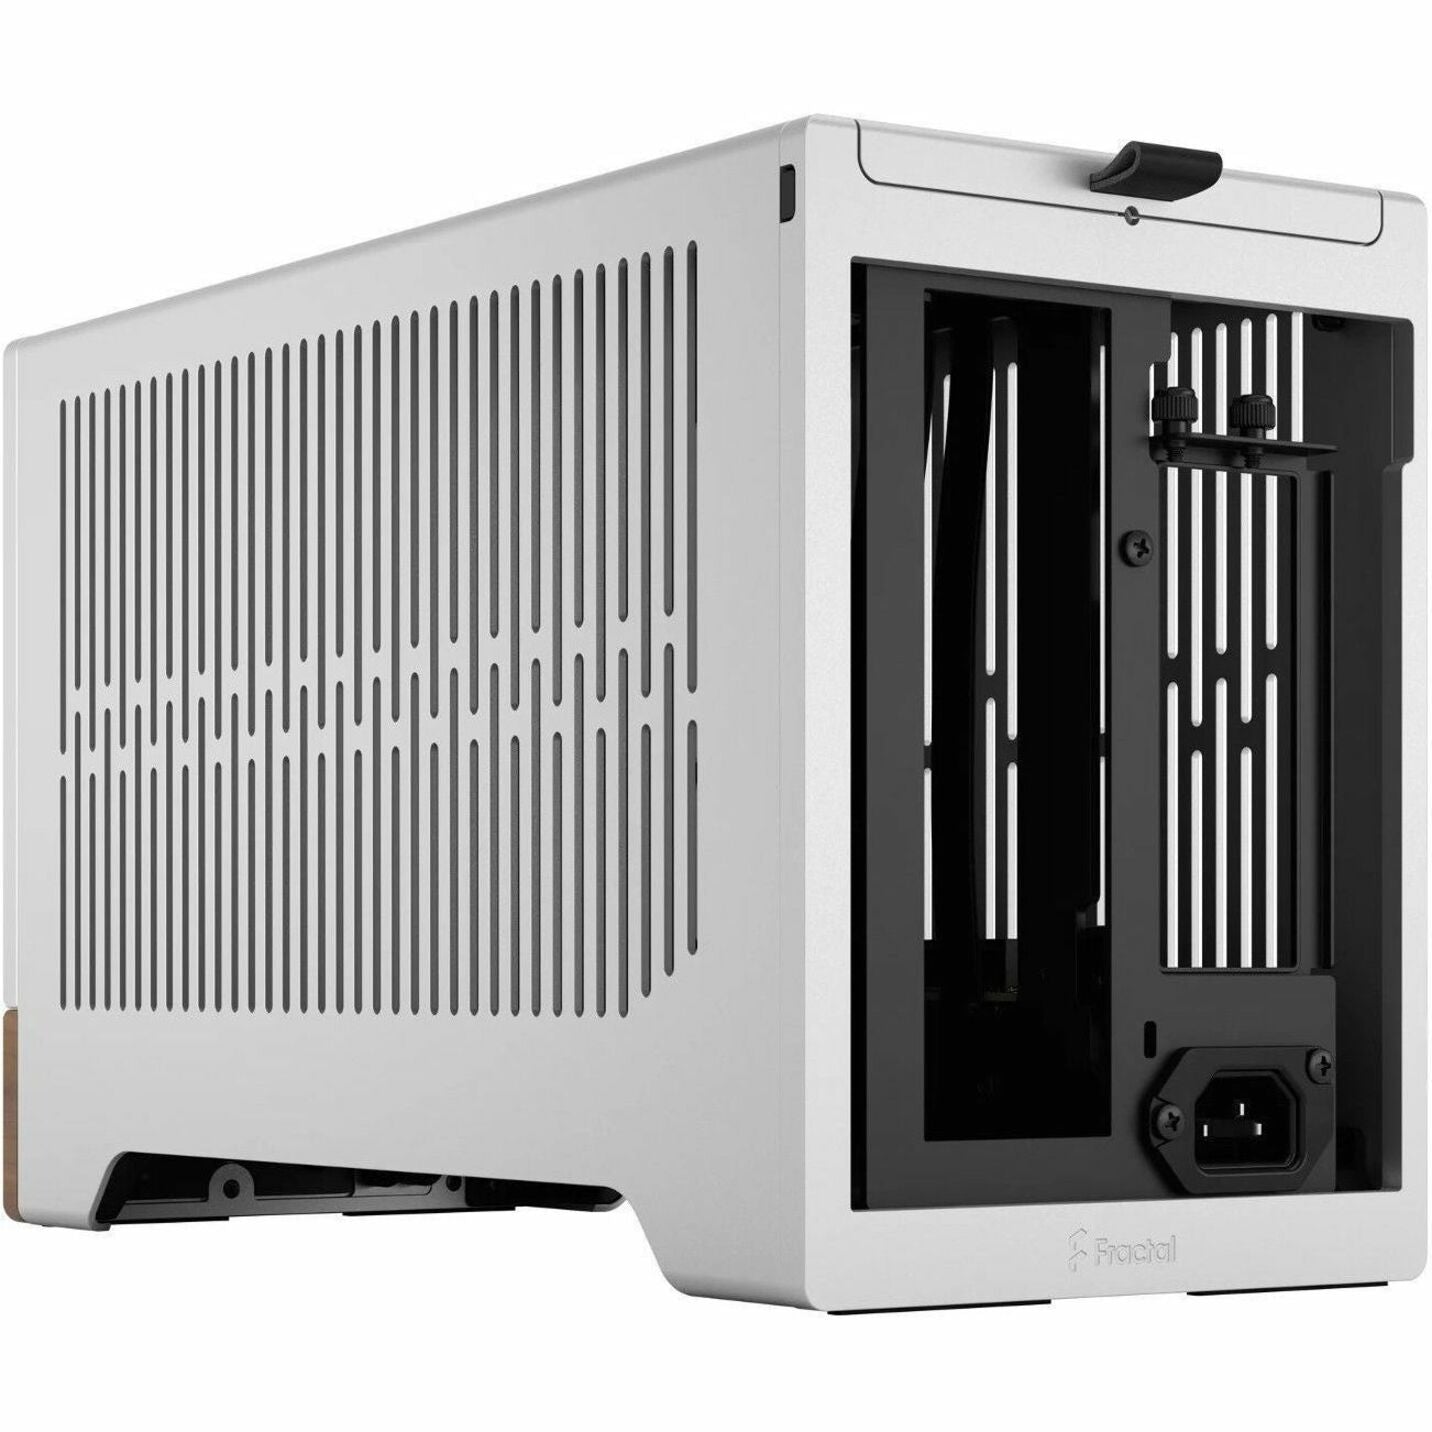 Fractal Design FD-C-TER1N-02 Terra Gaming Computer Case, Small Form Factor, Silver, Anodized Aluminum